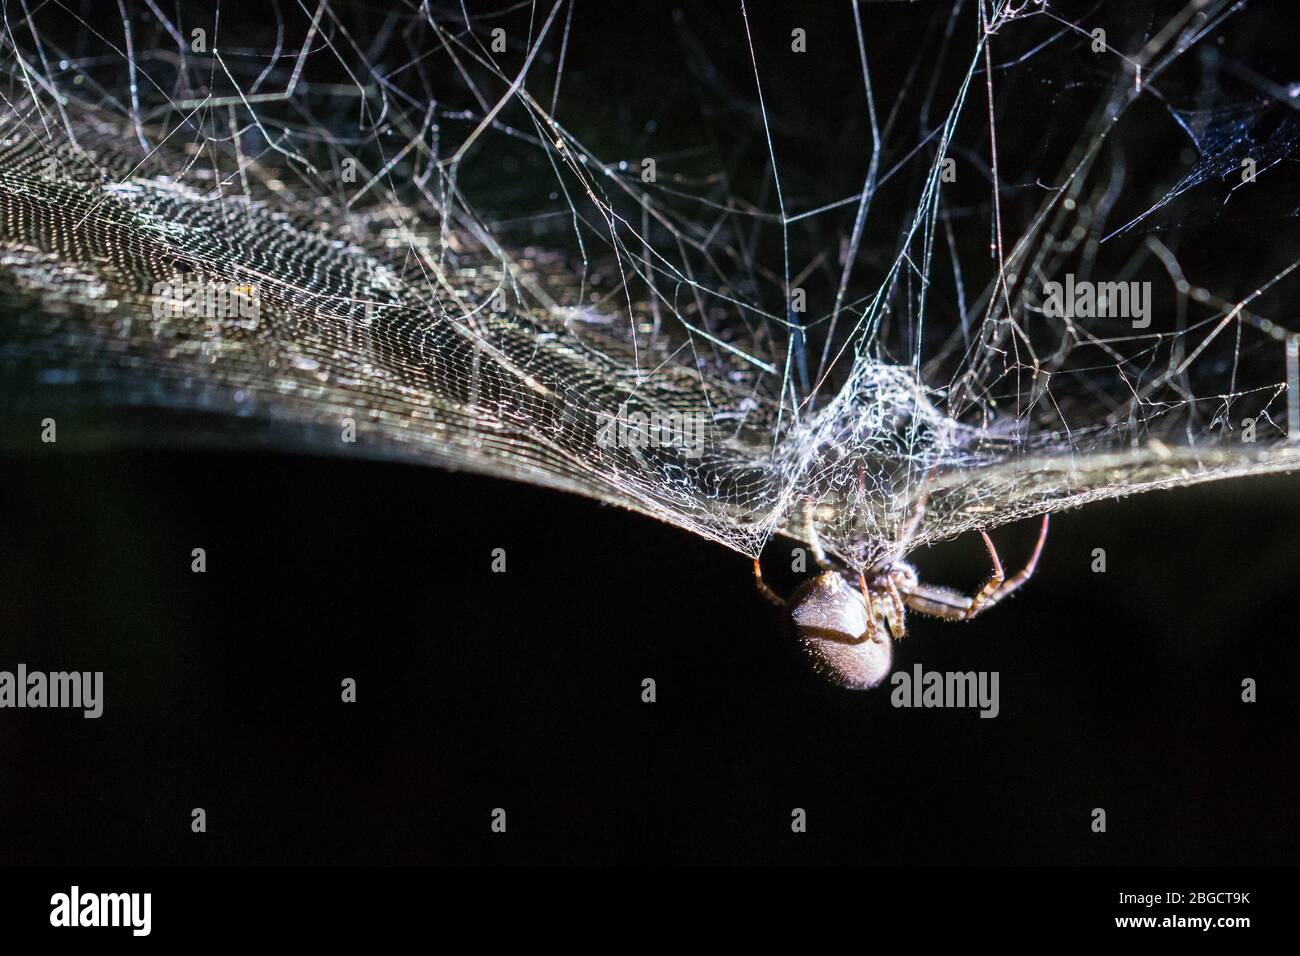 Closeup of a spider on its web in the Amazon rainforest, at night. Stock Photo